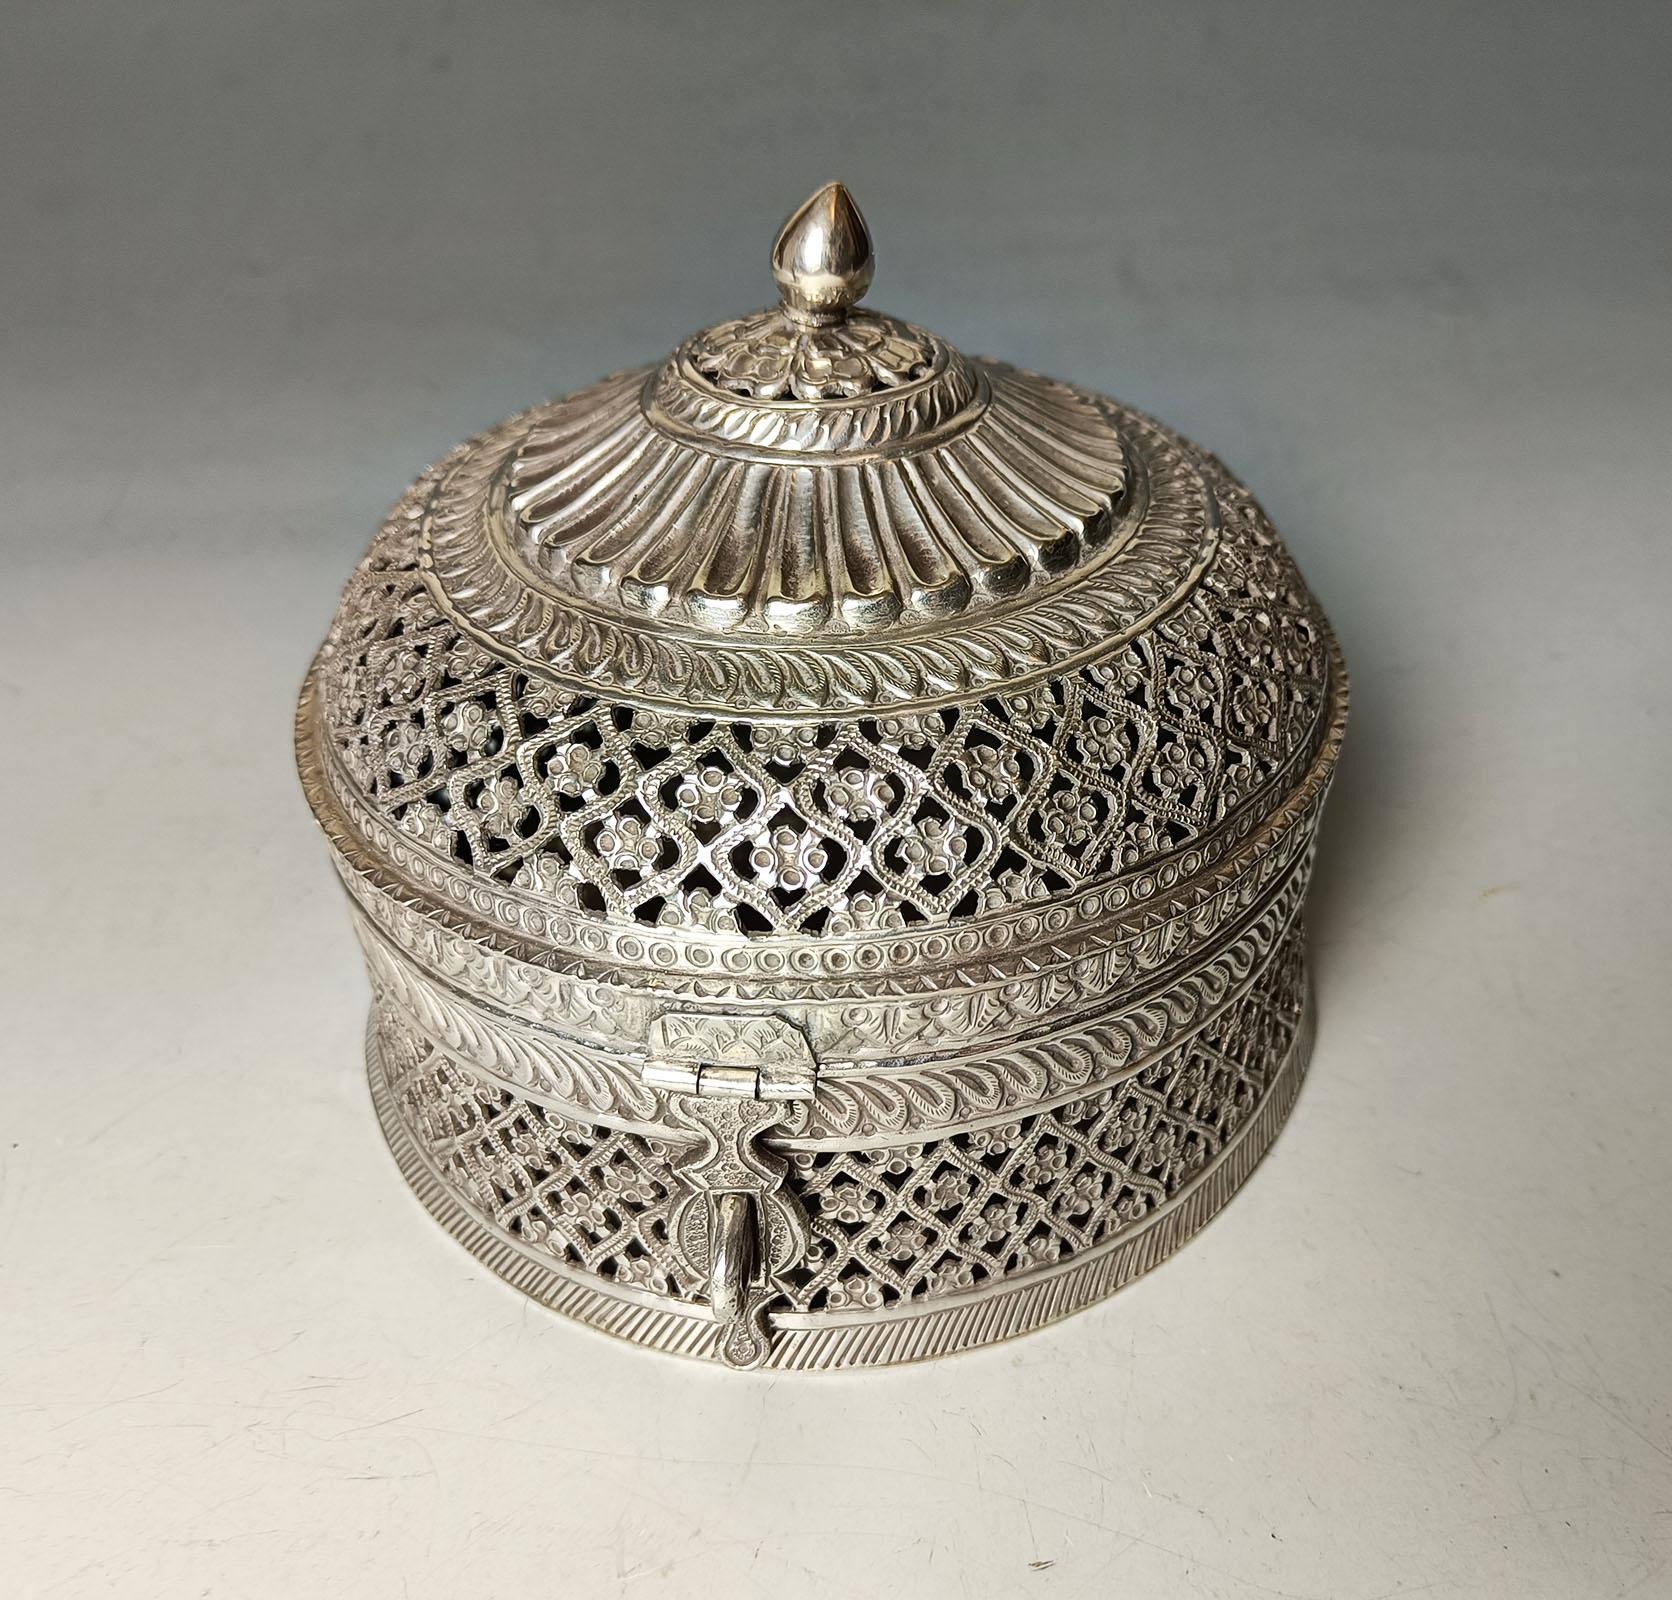 Superb large Indian mughal style repoussé and pierced silver   
Paan (Betel ) box.
A beautiful circular silver box with domed top with pierced  floral design and fine geometric repousse embossed and chiselled  decoration the domed lid which rises to